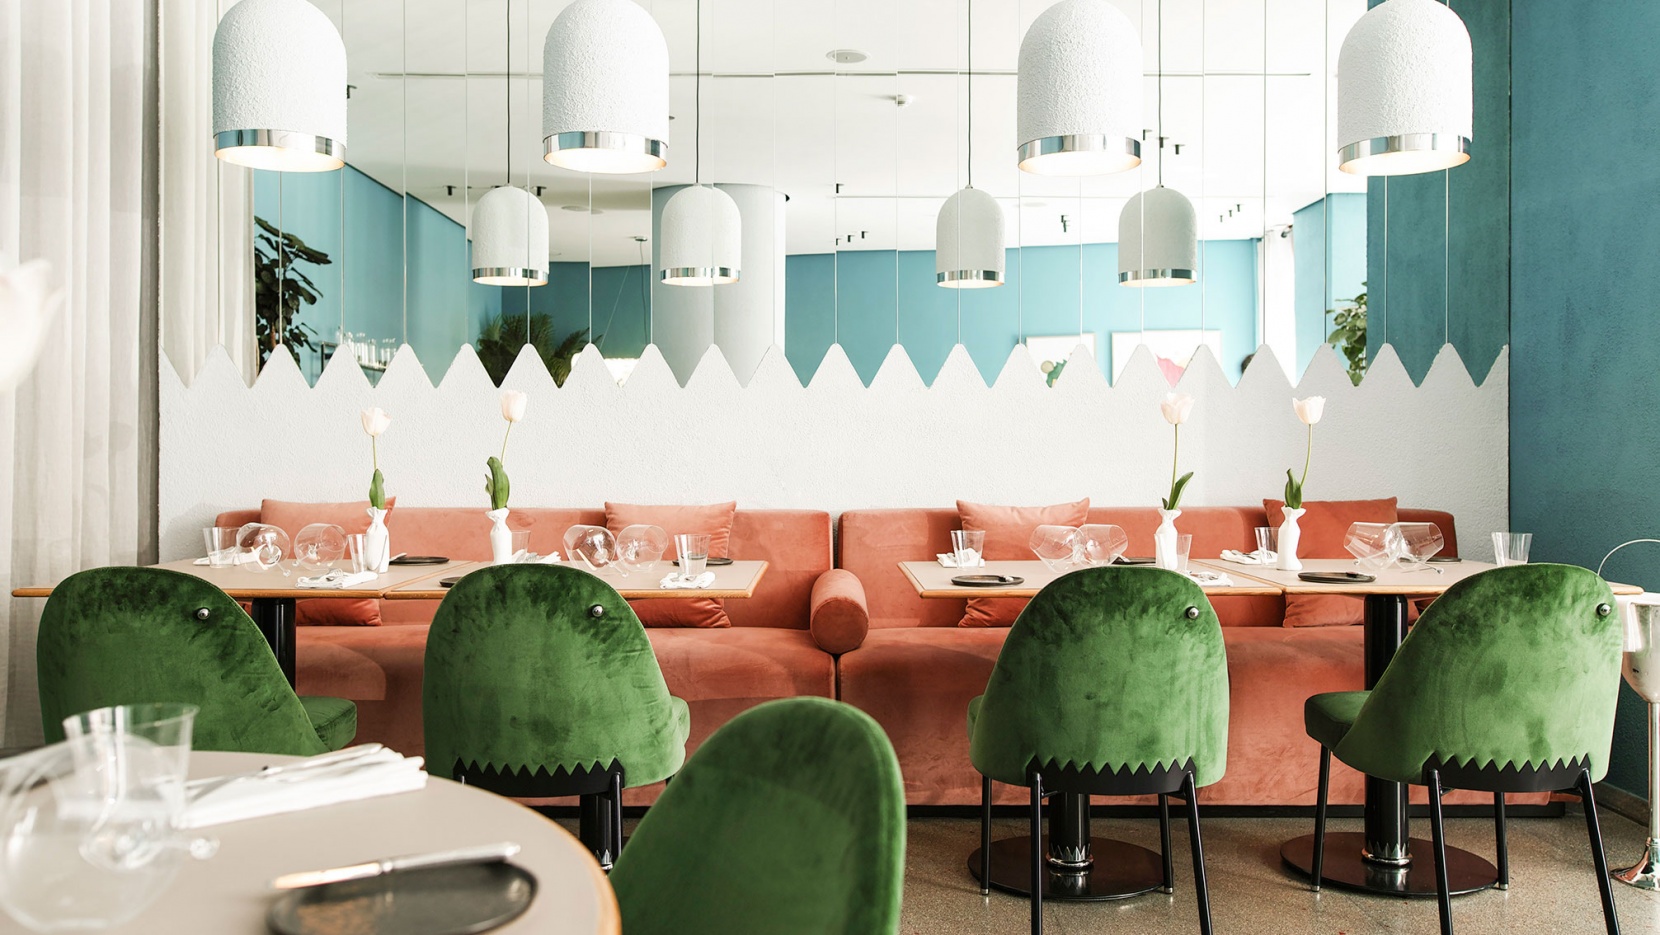 Stepping Inside Kaléo- A Dreamy Restaurant with Mid-Century Furniture